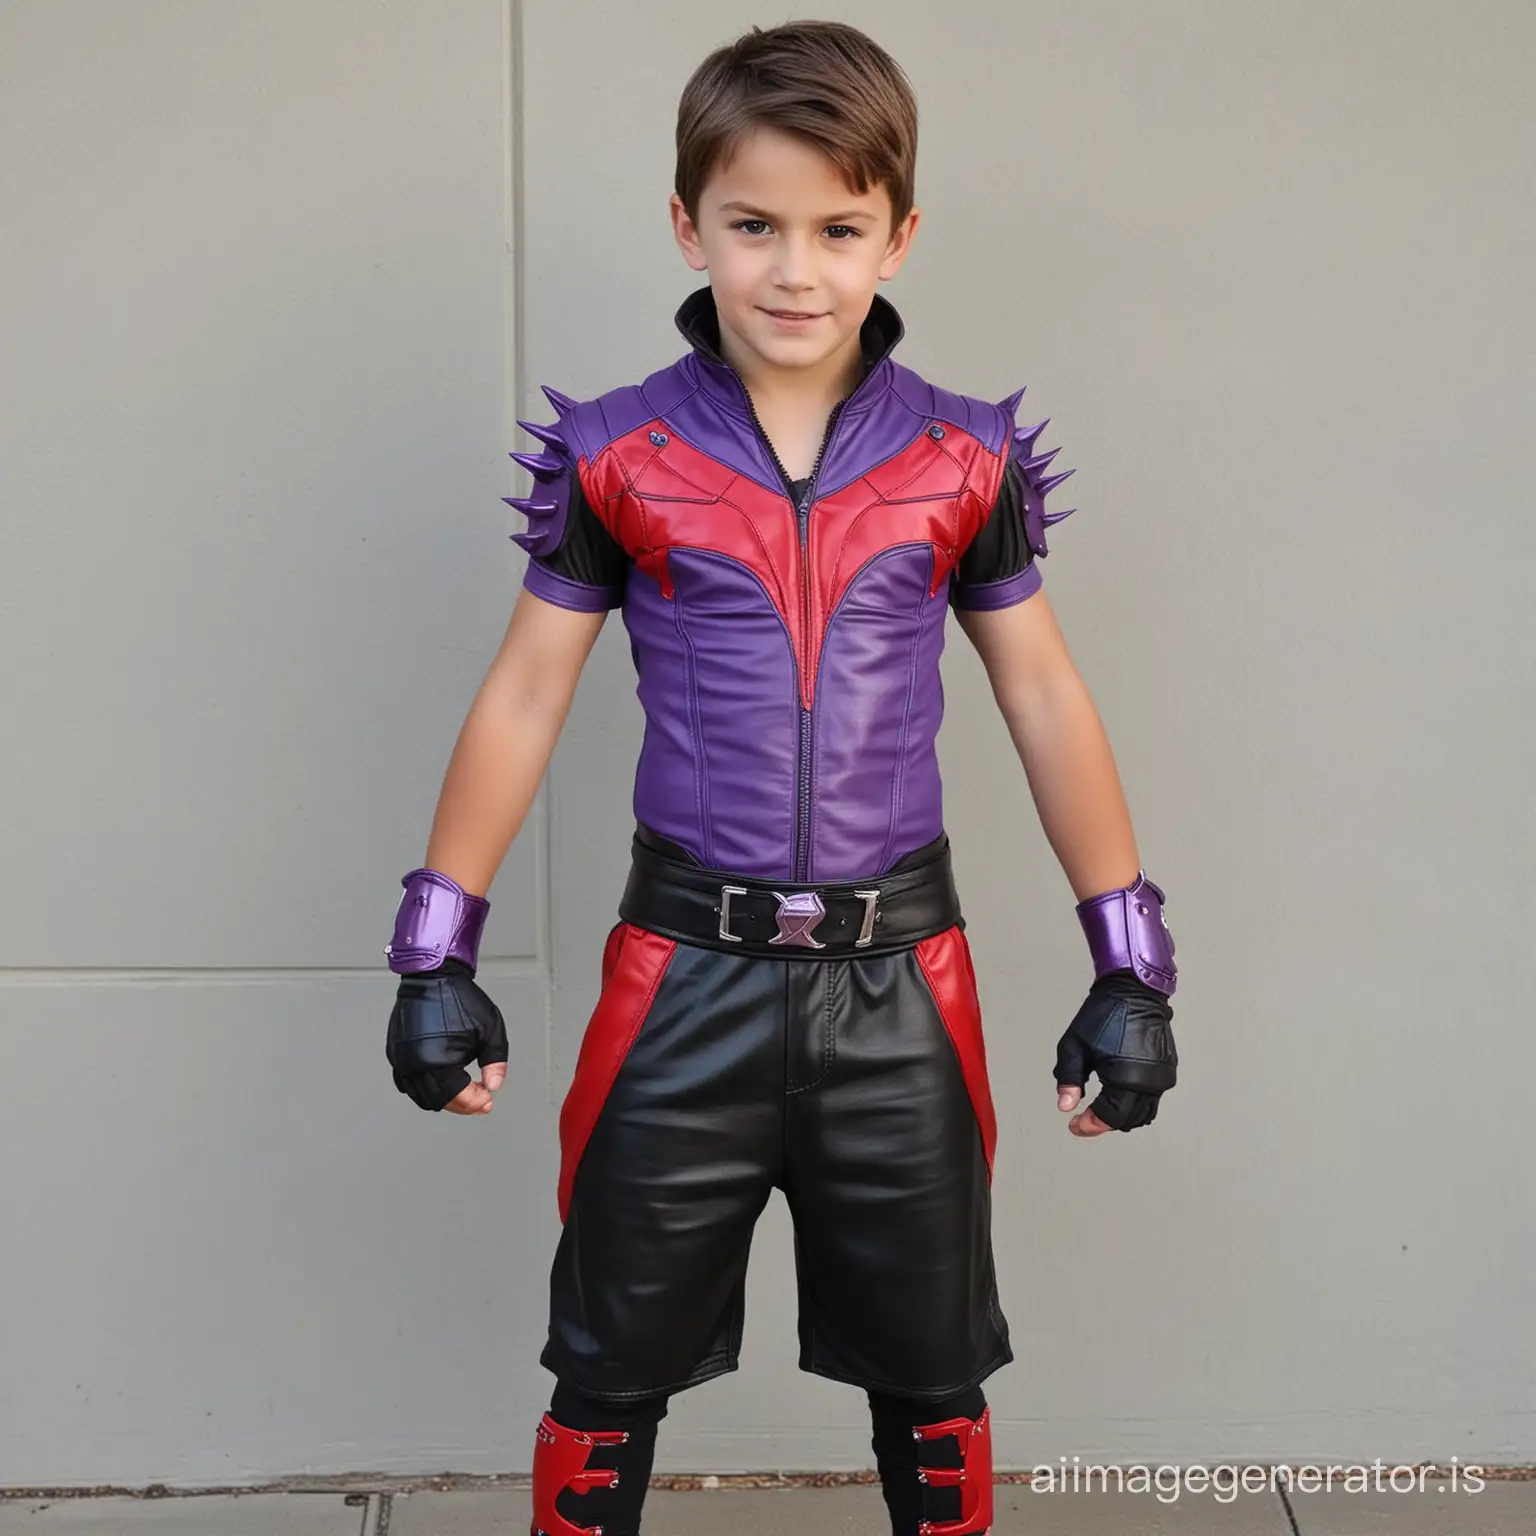 Create a villain costume for an 8 year old boy villain who is physically fit and has abs, cool, wicked, leather, shorts, comfortable yet intimidating, shorts, different shades of purple and red with hints of green and black